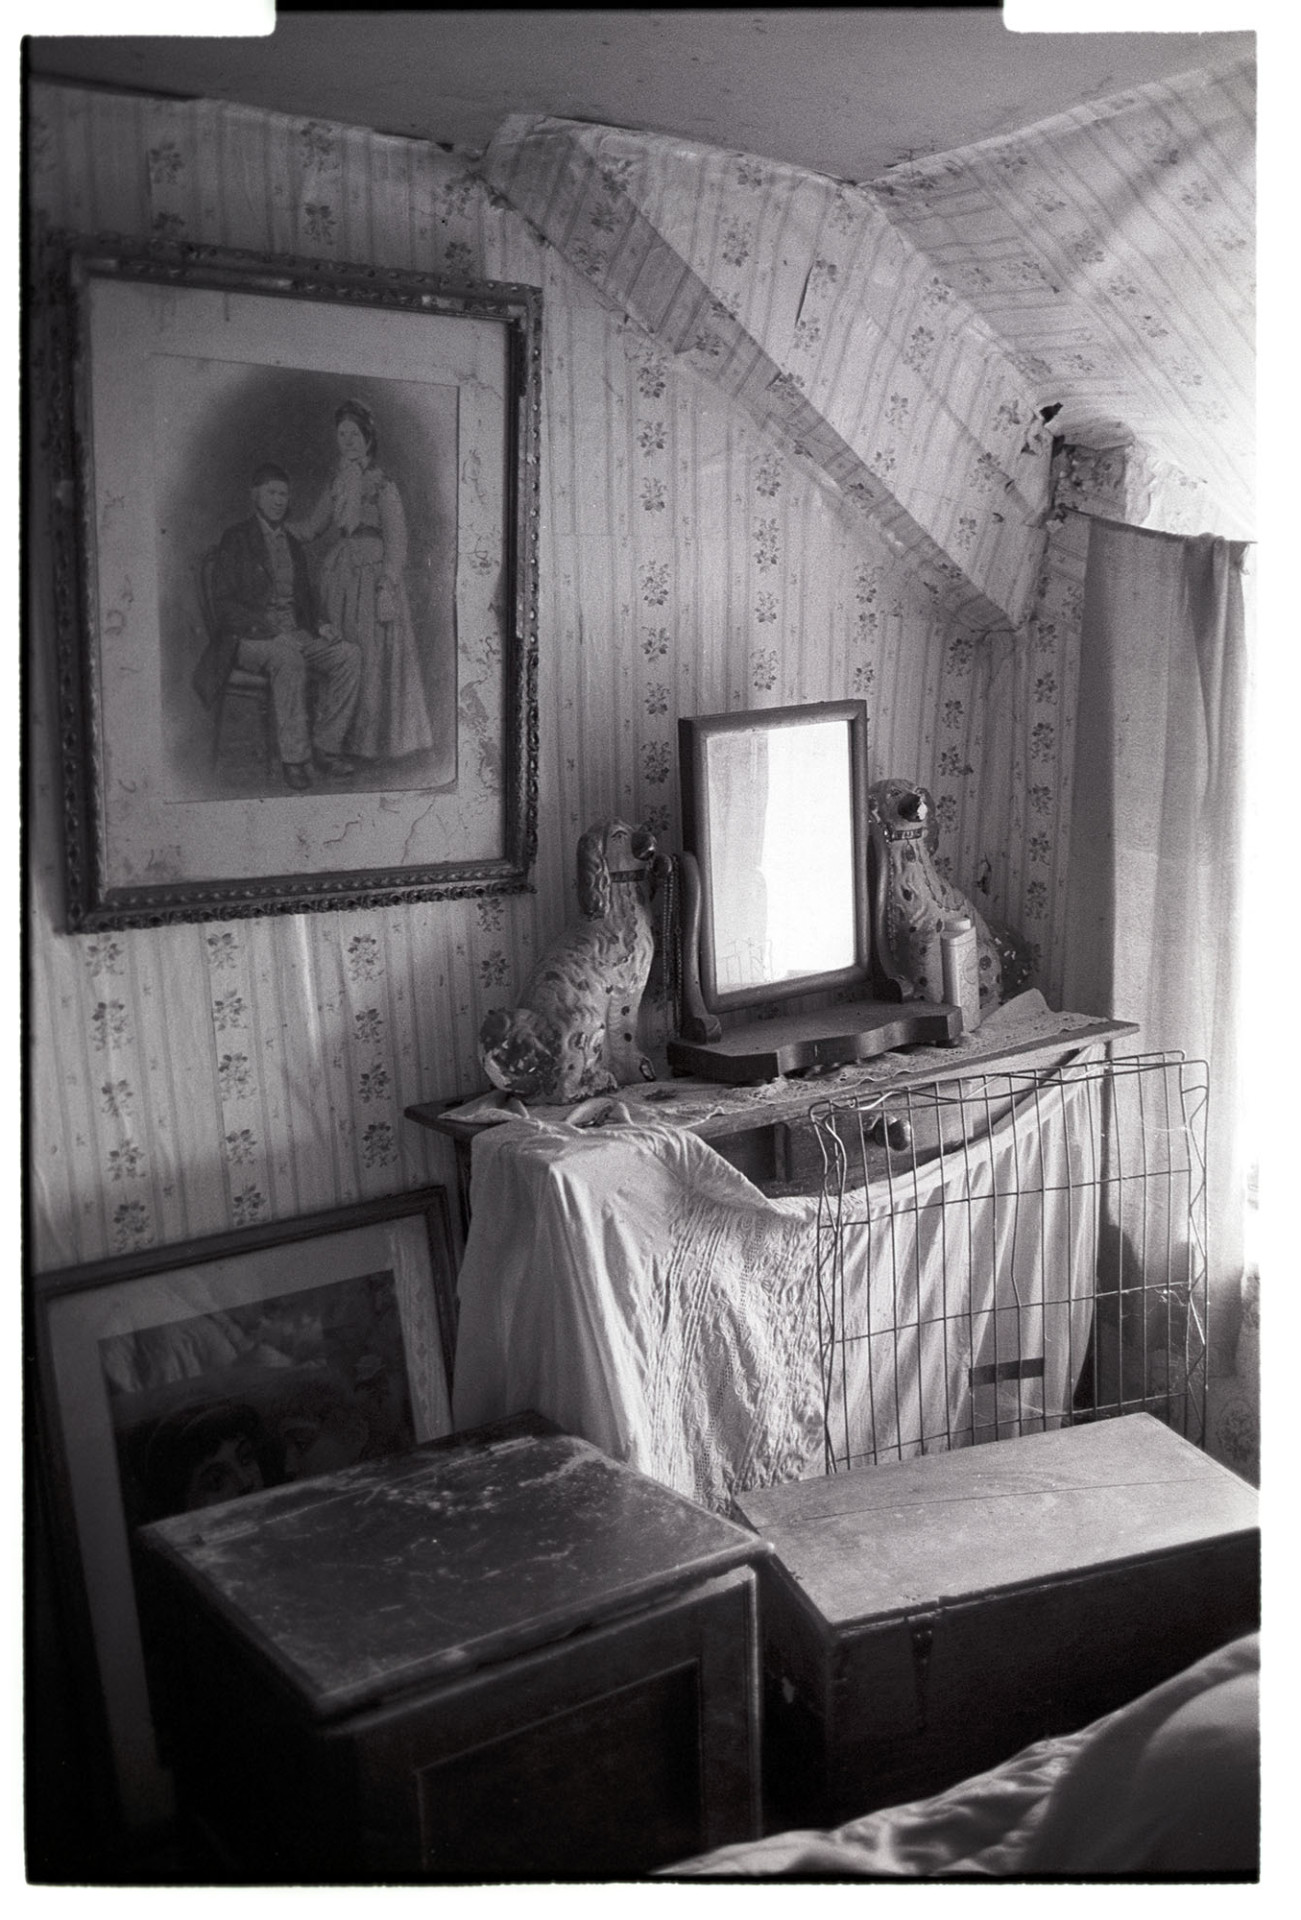 Disused farmhouse bedroom, dressing table with mirror, photograph and china dogs. 
[A disused bedroom in Wilfie Spiers's farmhouse at Mount Pleasant, Beamsworthy. A dressing table with mirror and two china dogs, cupboards and paintings are in the room. The walls are covered with patterned wallpaper.]